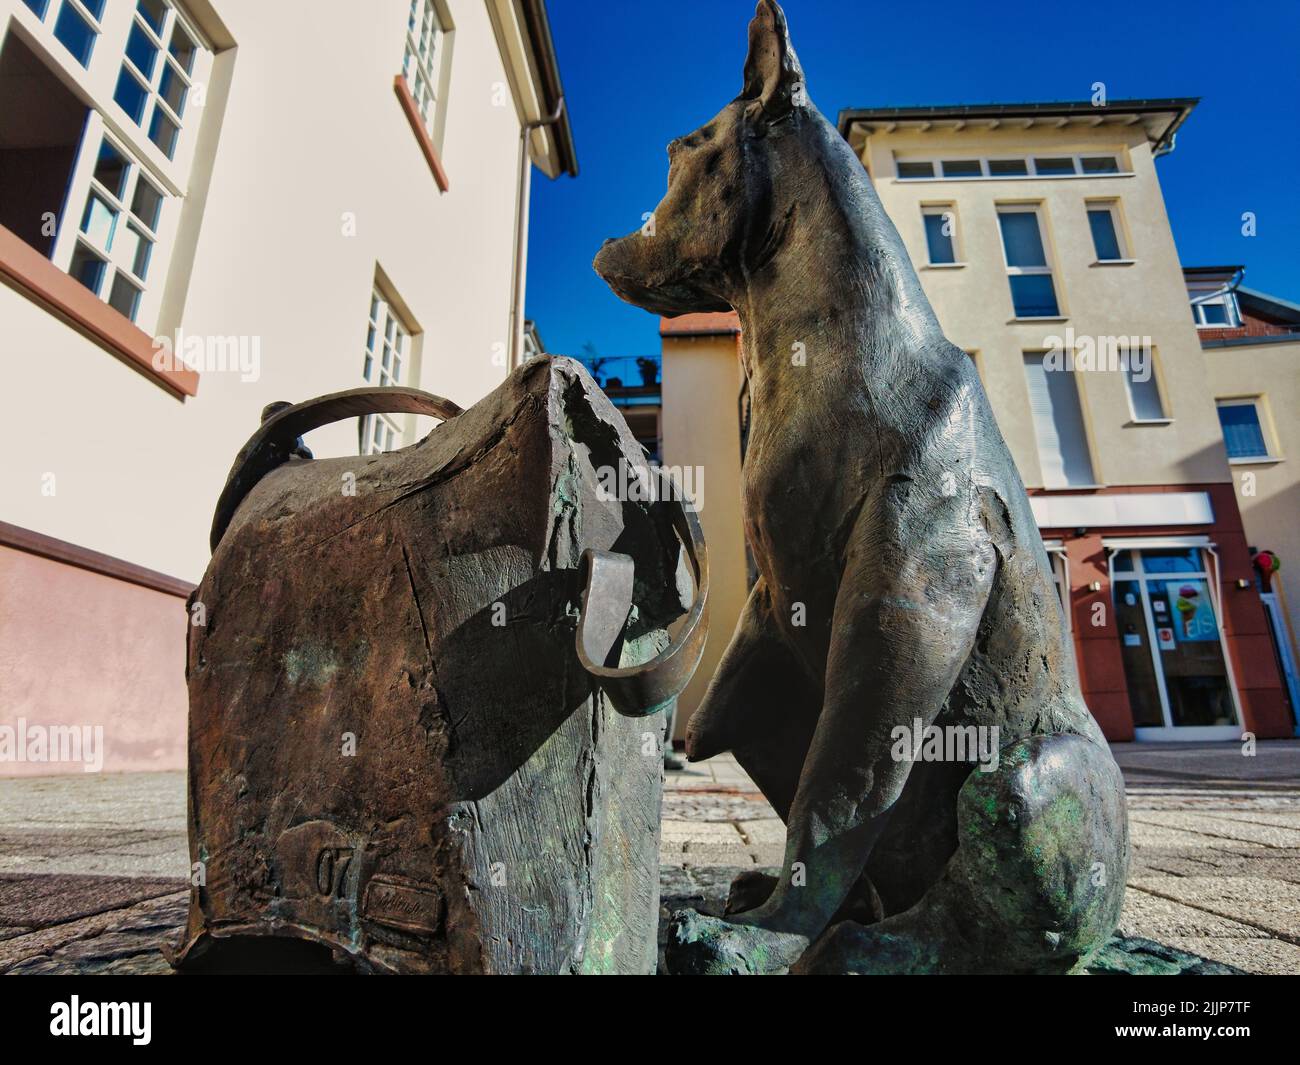 An old sculpture of a dog in Dreieich, Germany on a street Stock Photo